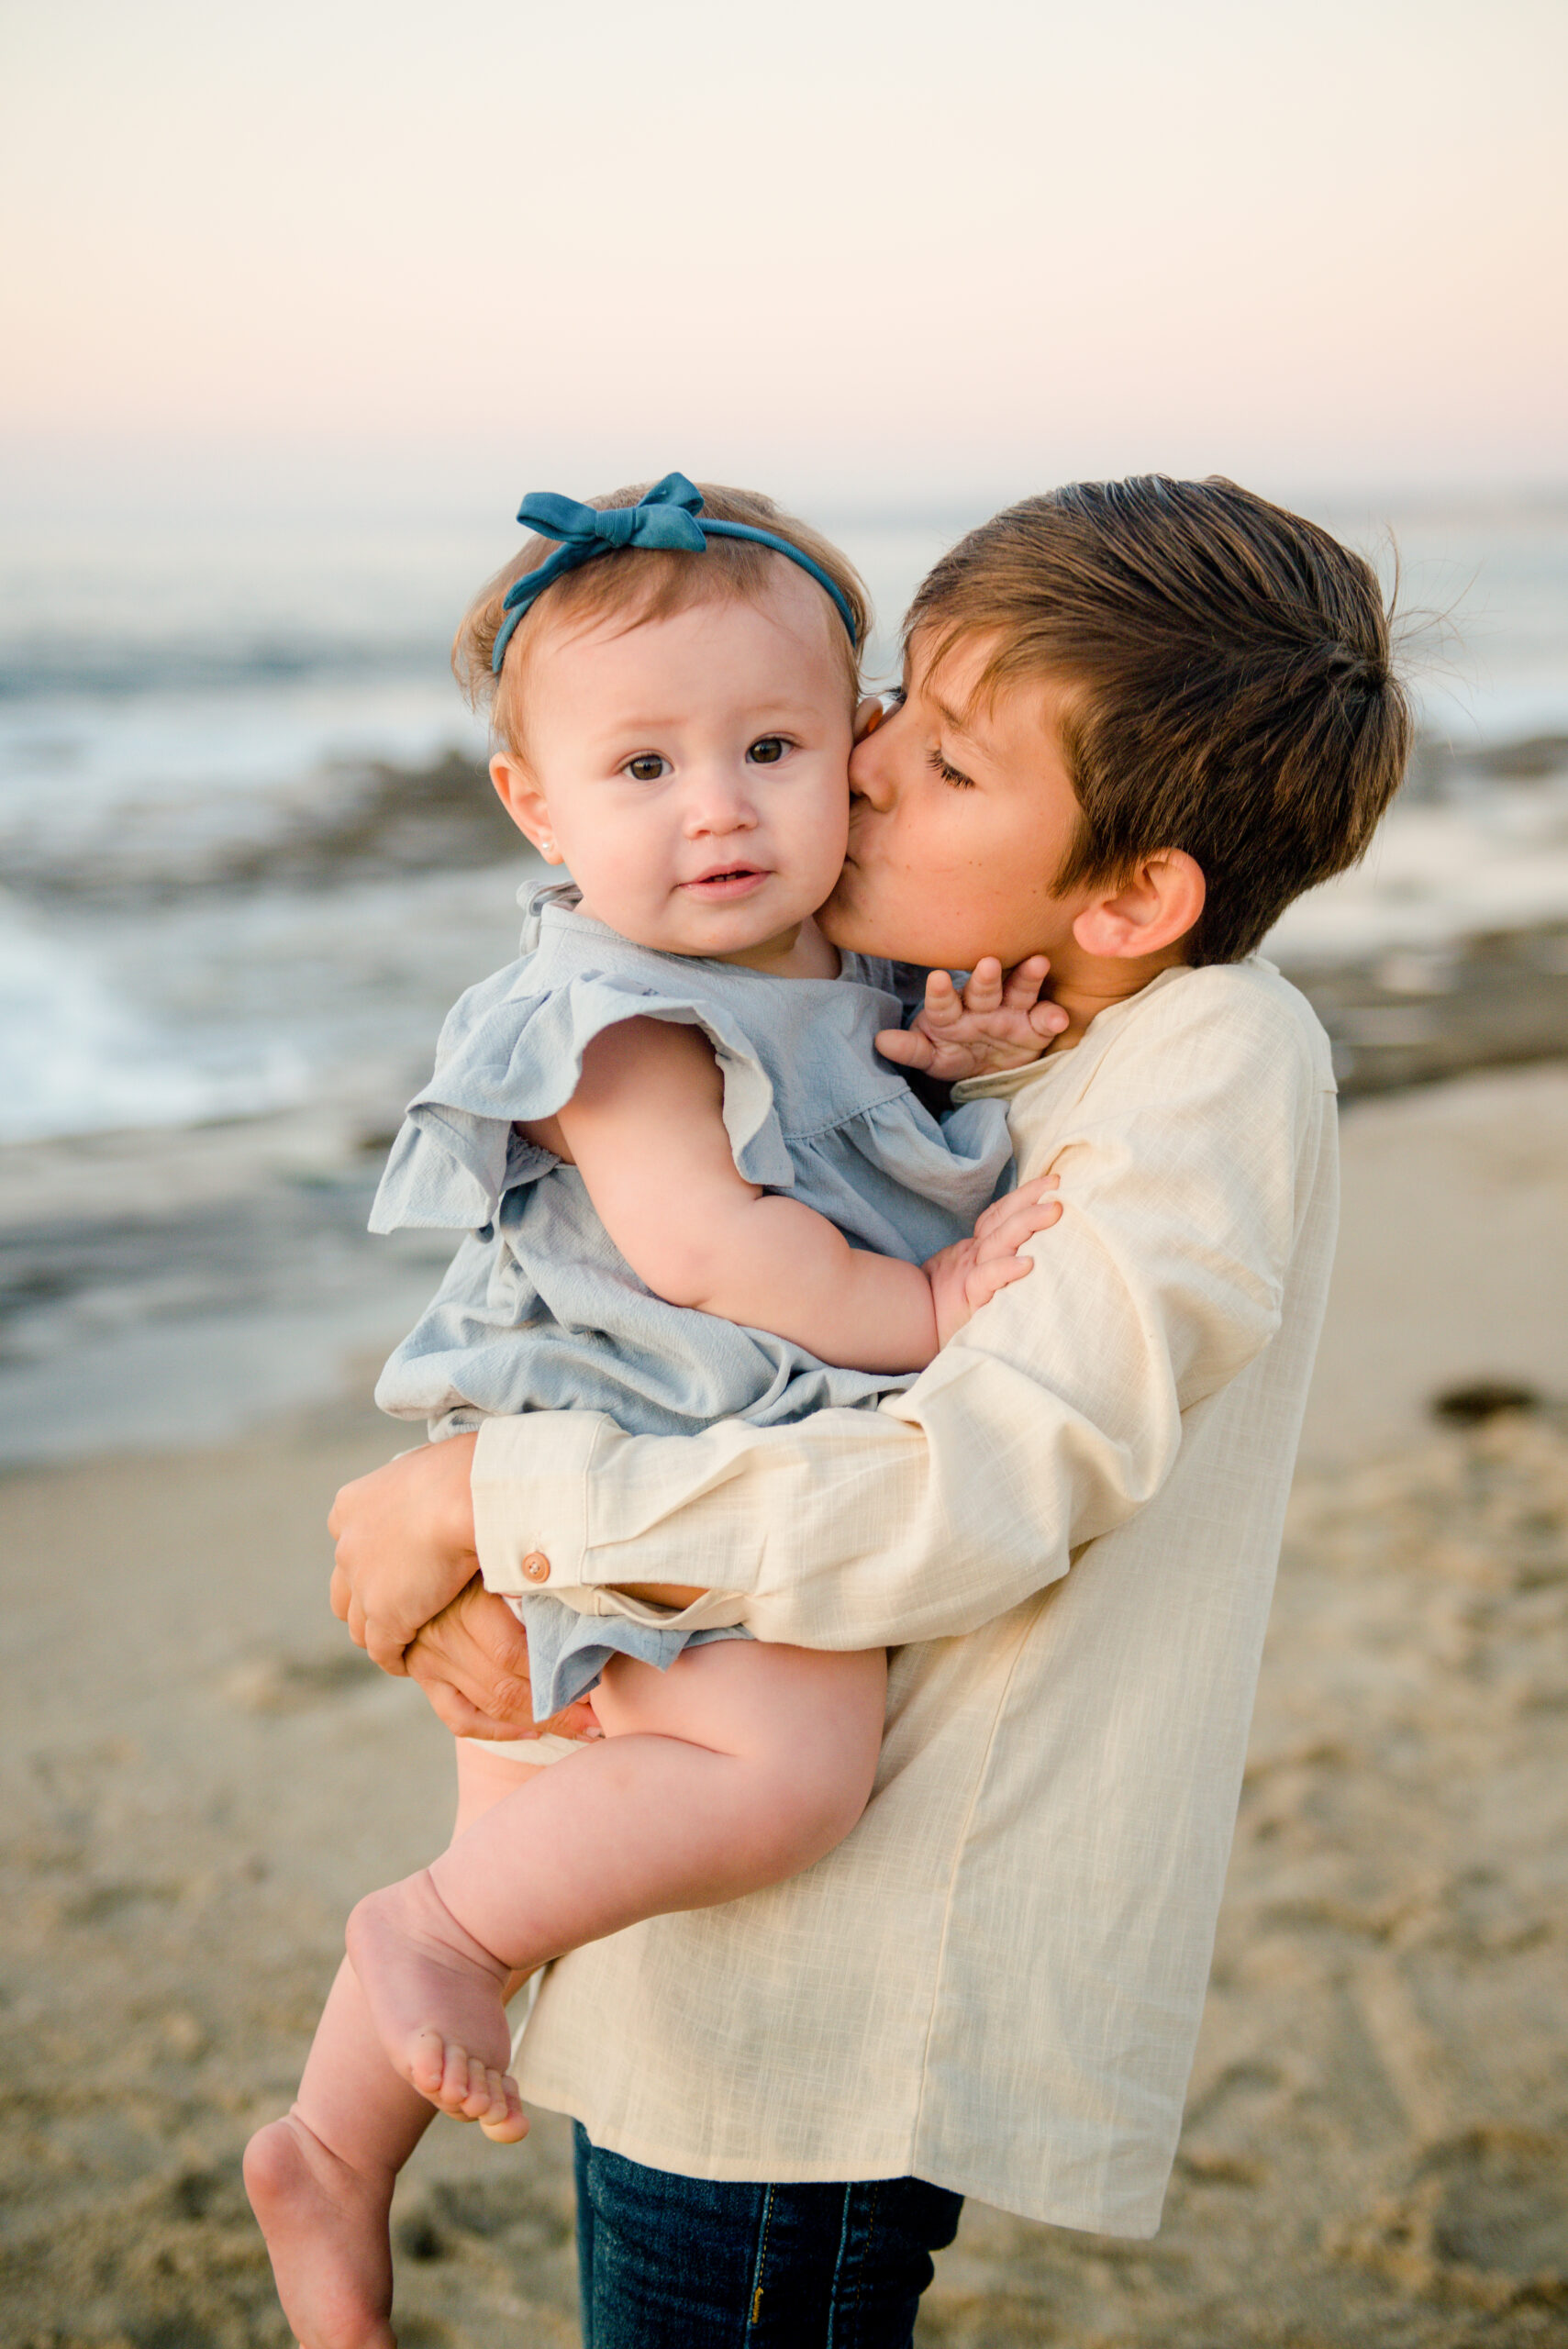 sweet brother showing love to baby at the beach in san diego